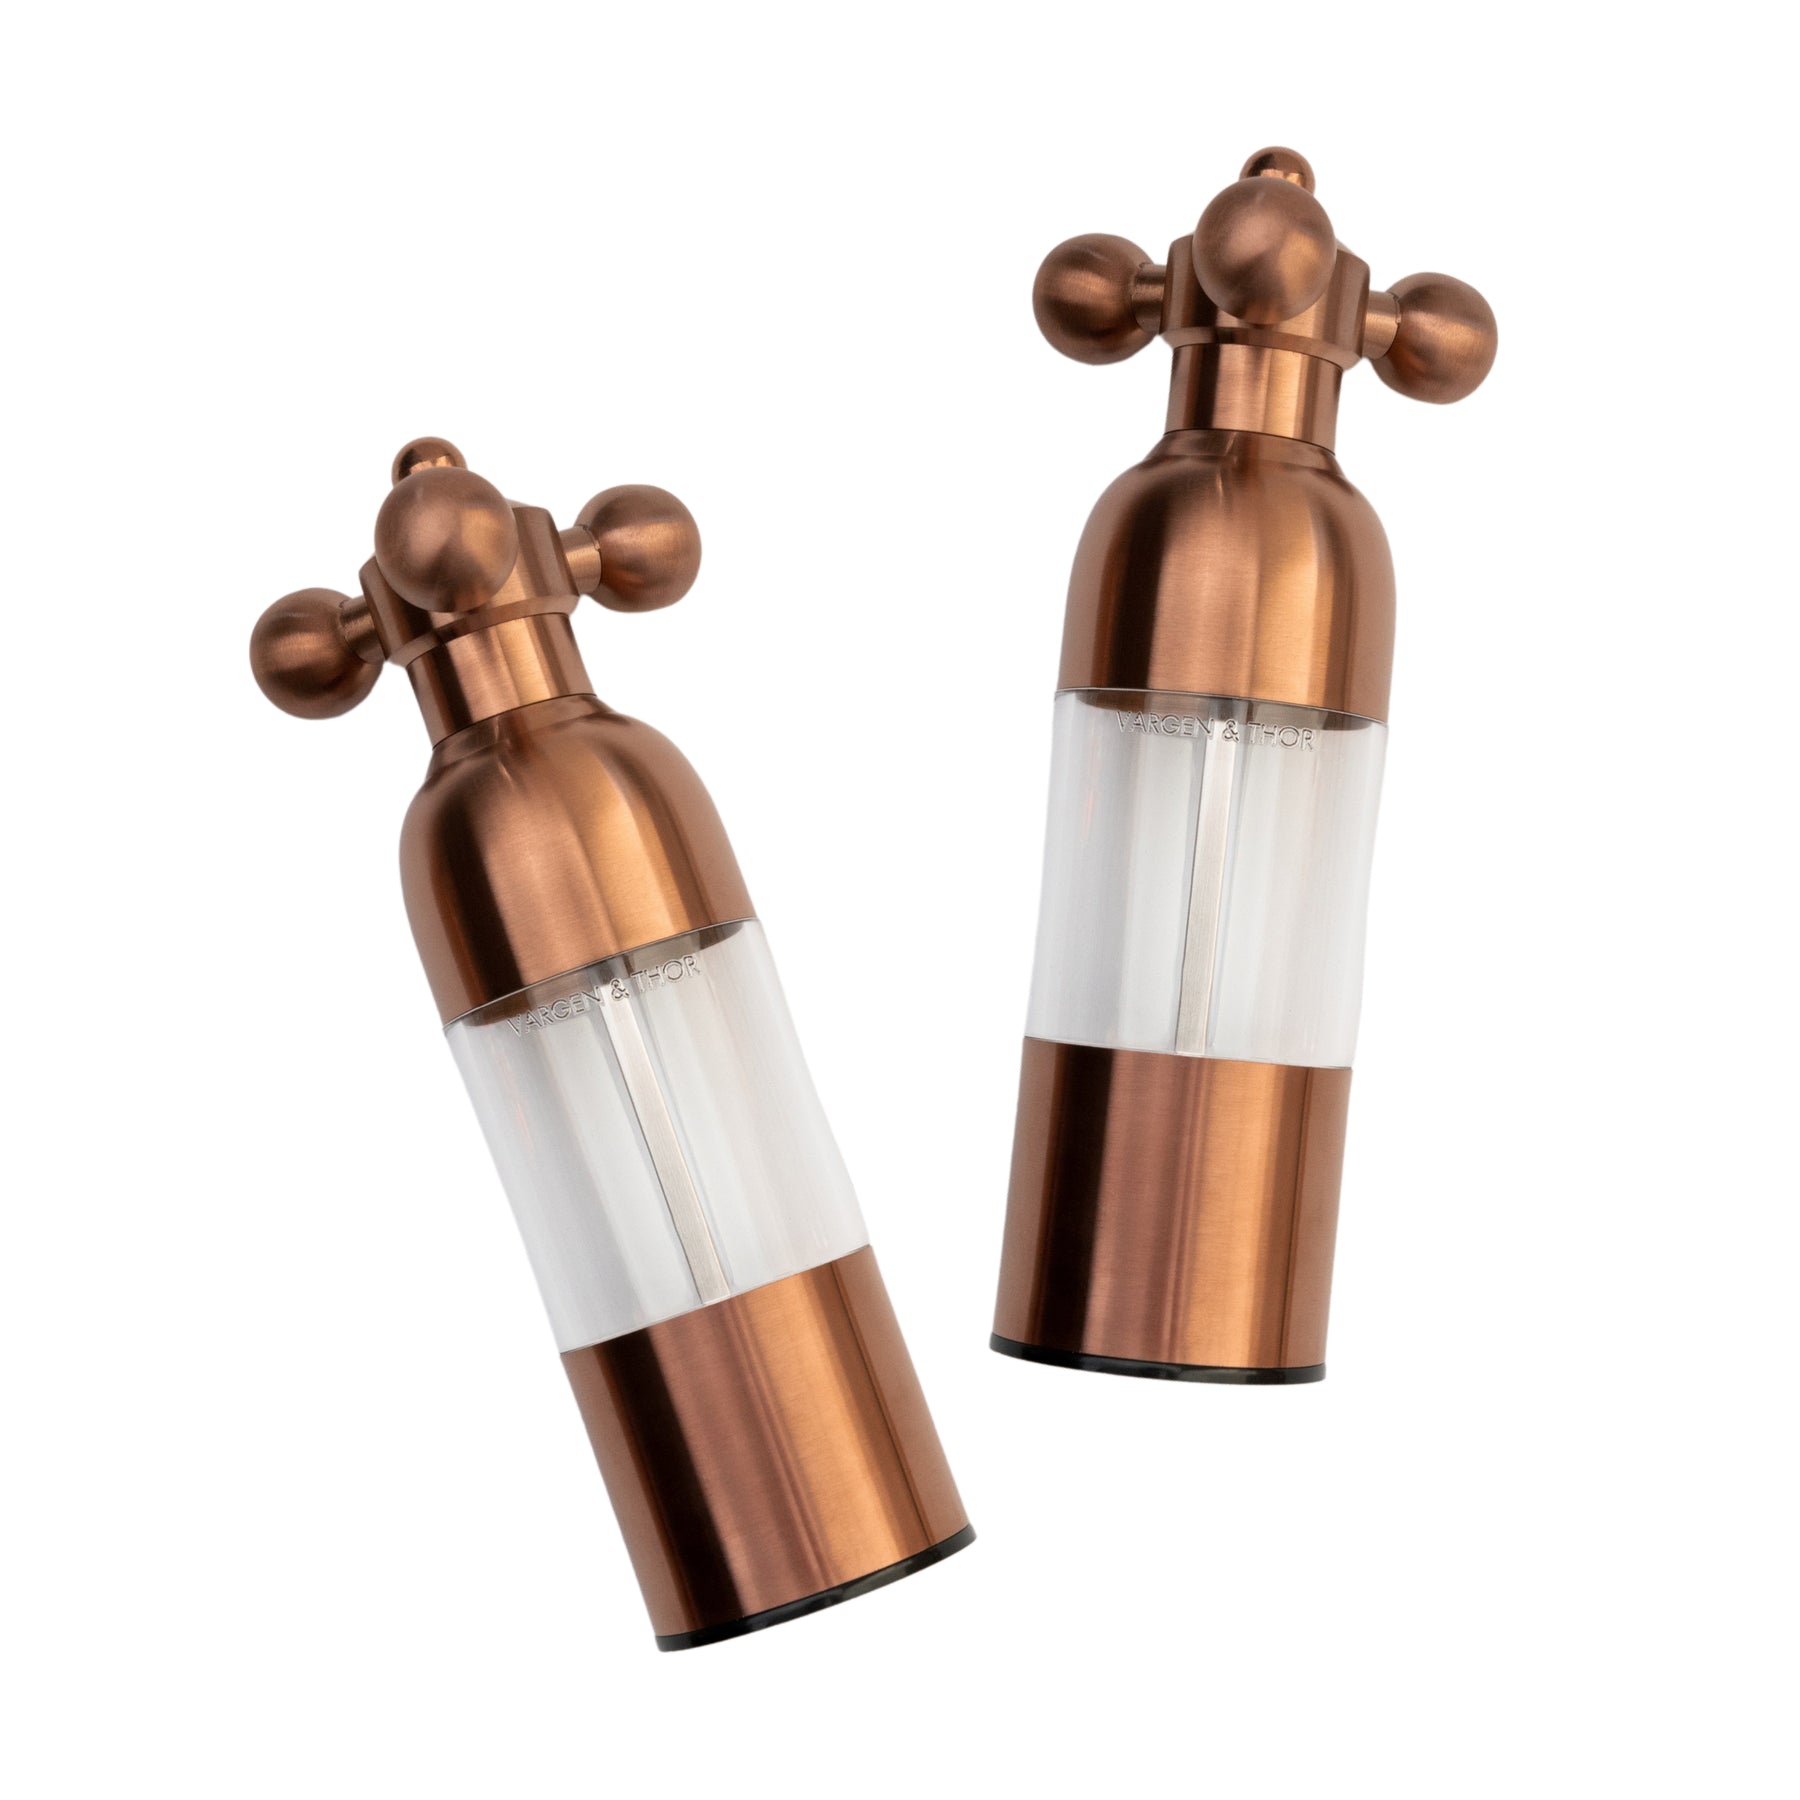 Season and Stir™ - AXIA, Salt and pepper mill (Matt Copper) will be back in stock in February